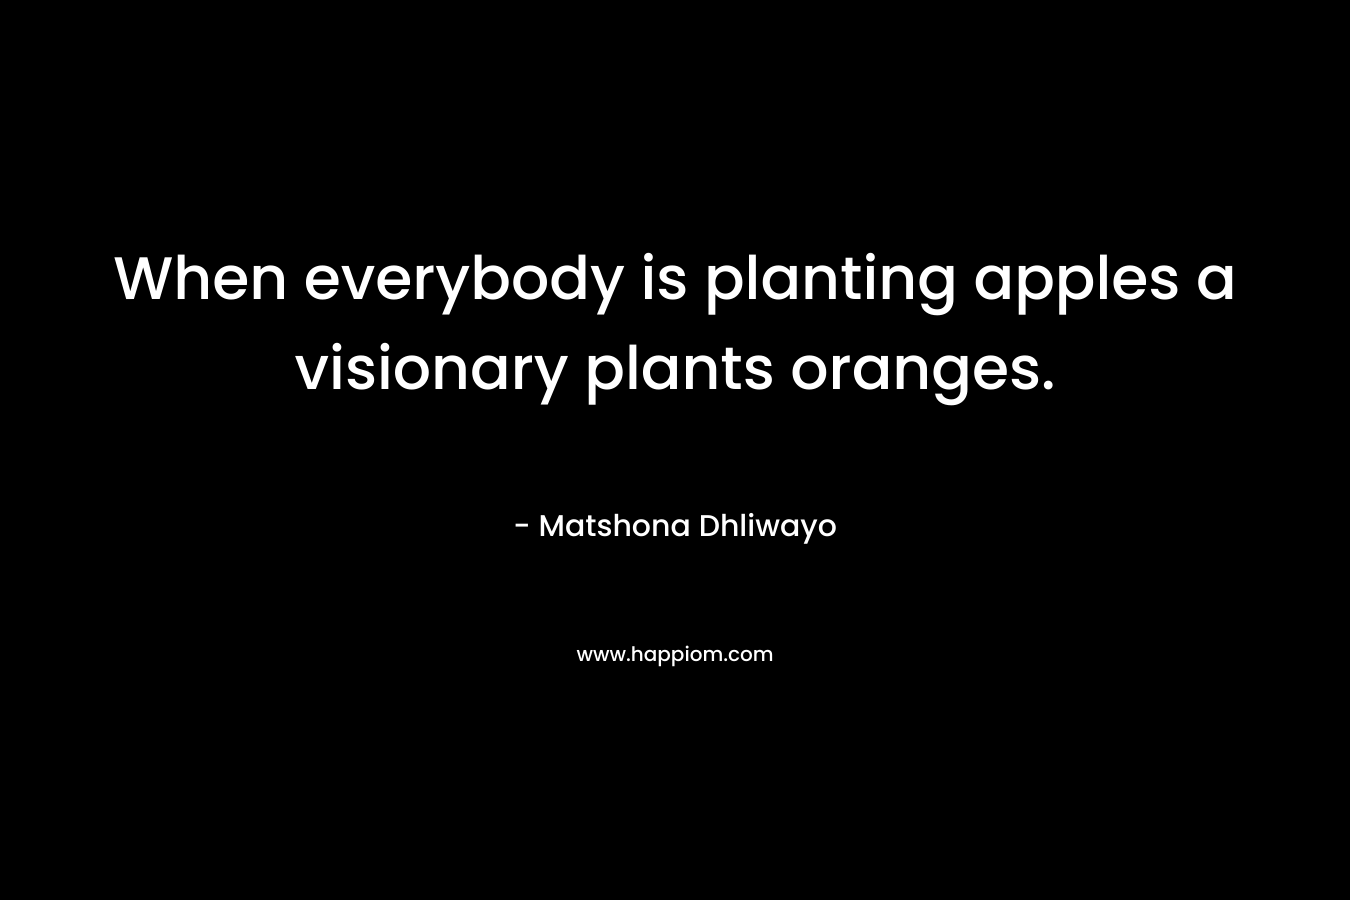 When everybody is planting apples a visionary plants oranges. – Matshona Dhliwayo